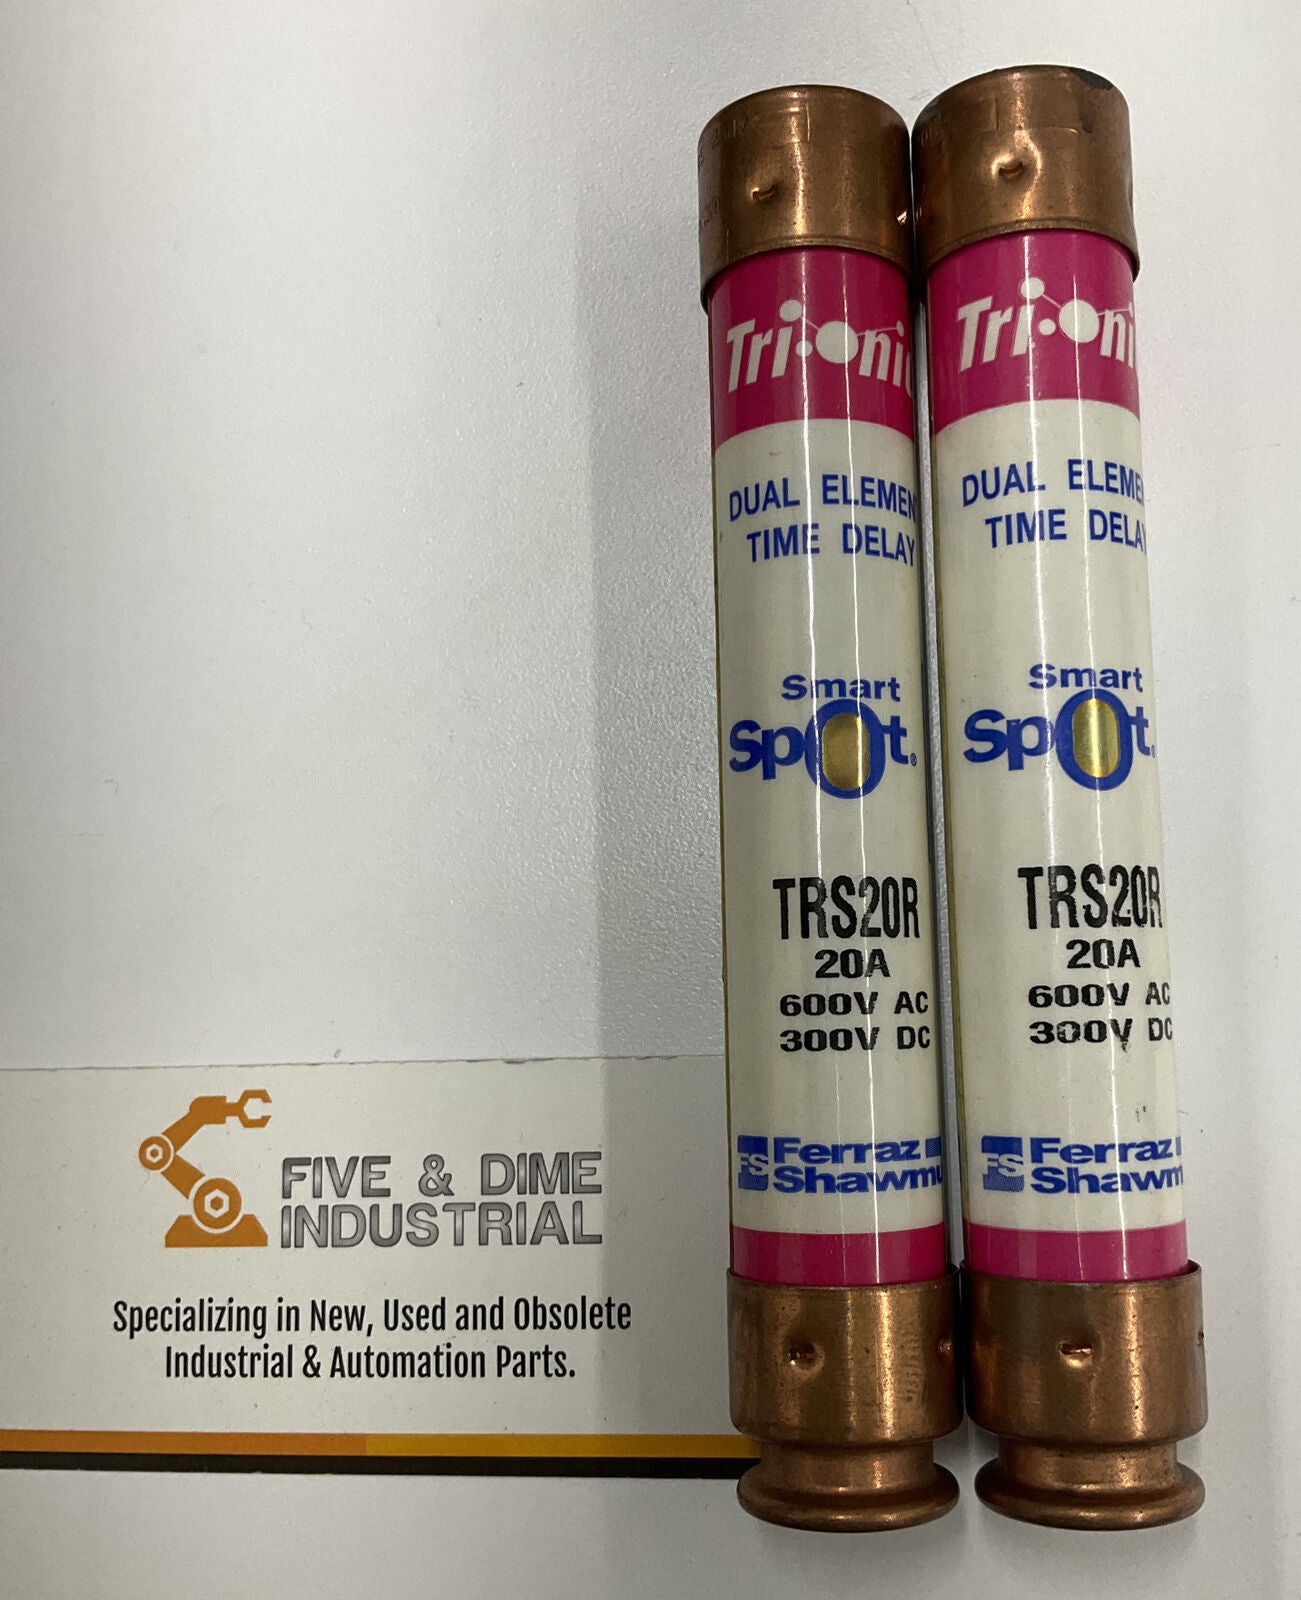 Gould Shawmut Tri-Onic TRS20R  Lot of (2) Time Delay Fuses (CL113) - 0